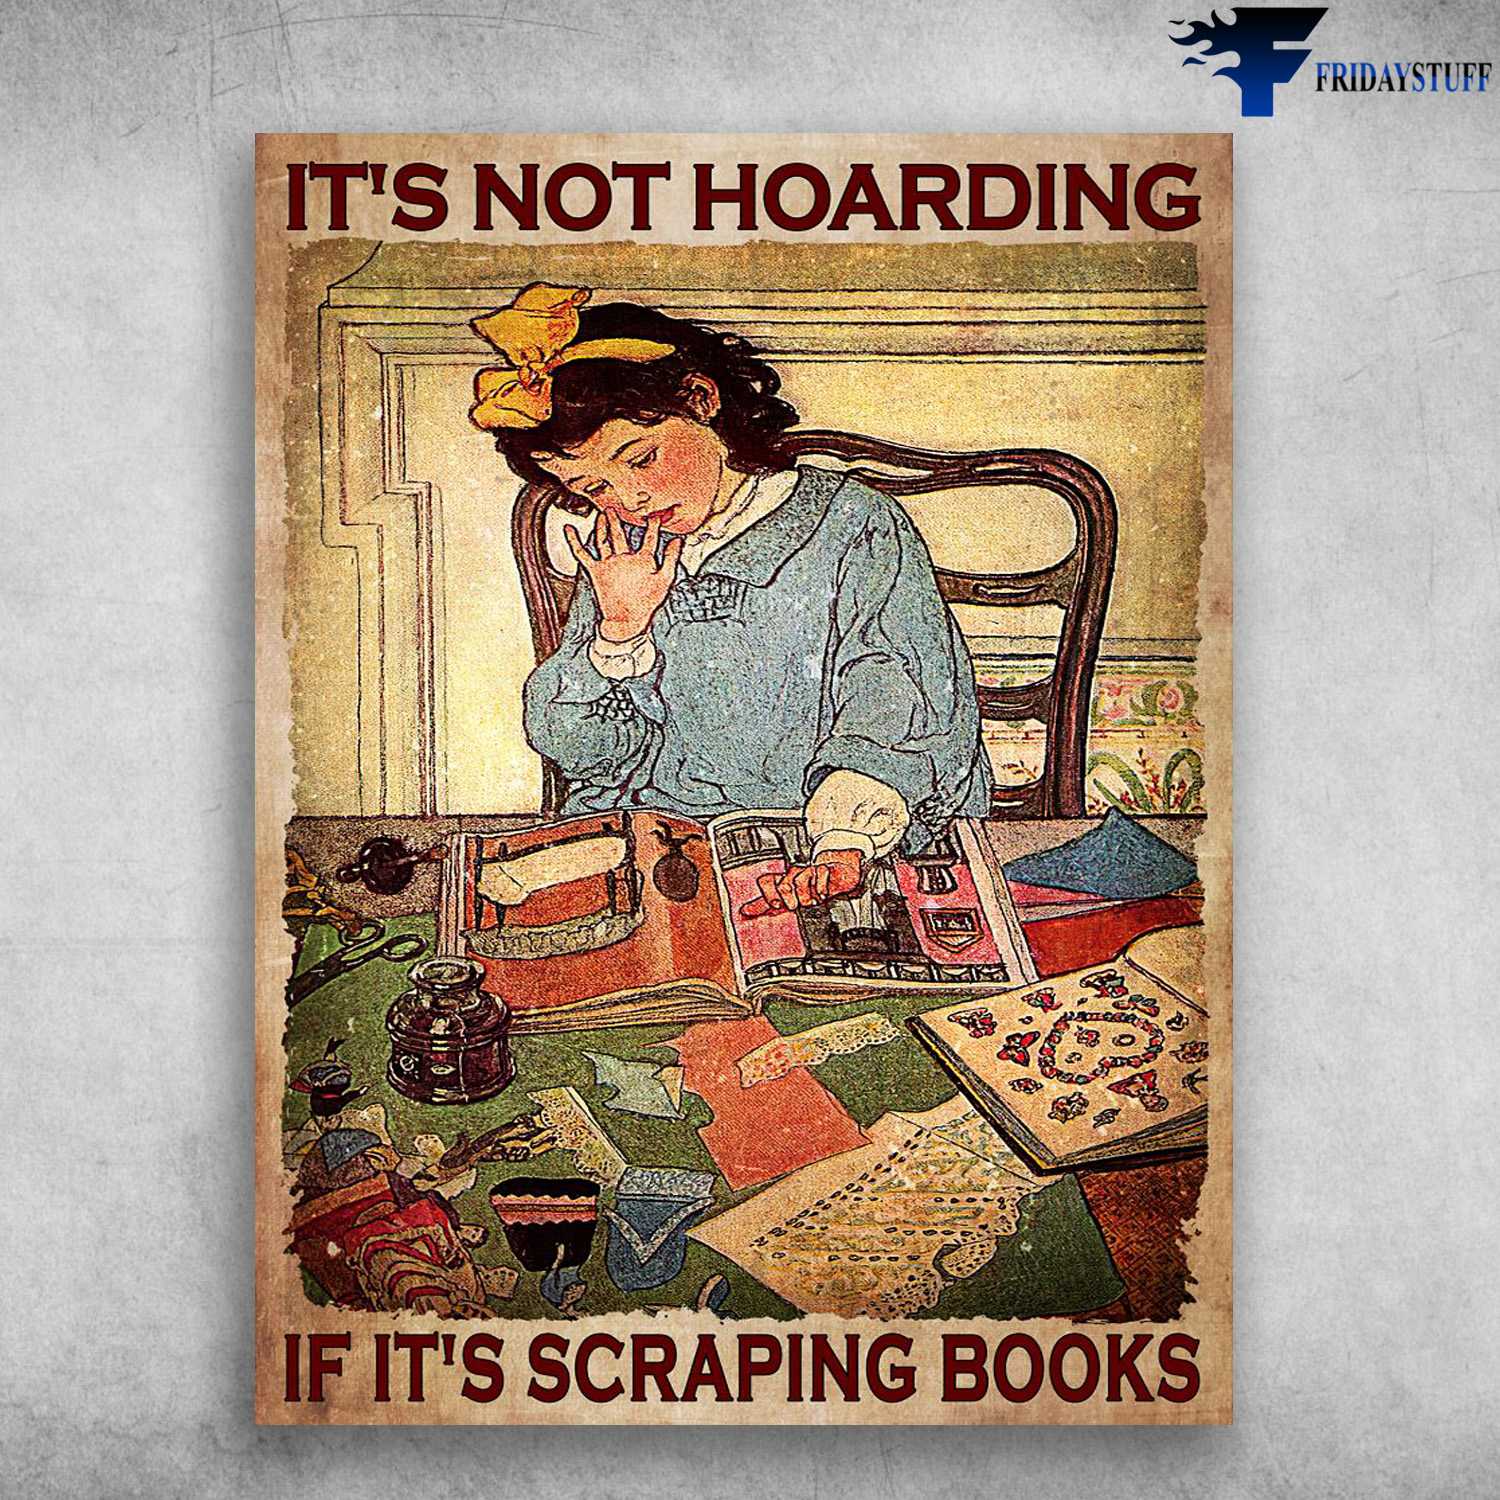 Scraping Girl, Scraping Poster - It's Not Hoarding, If It's Scraping Books